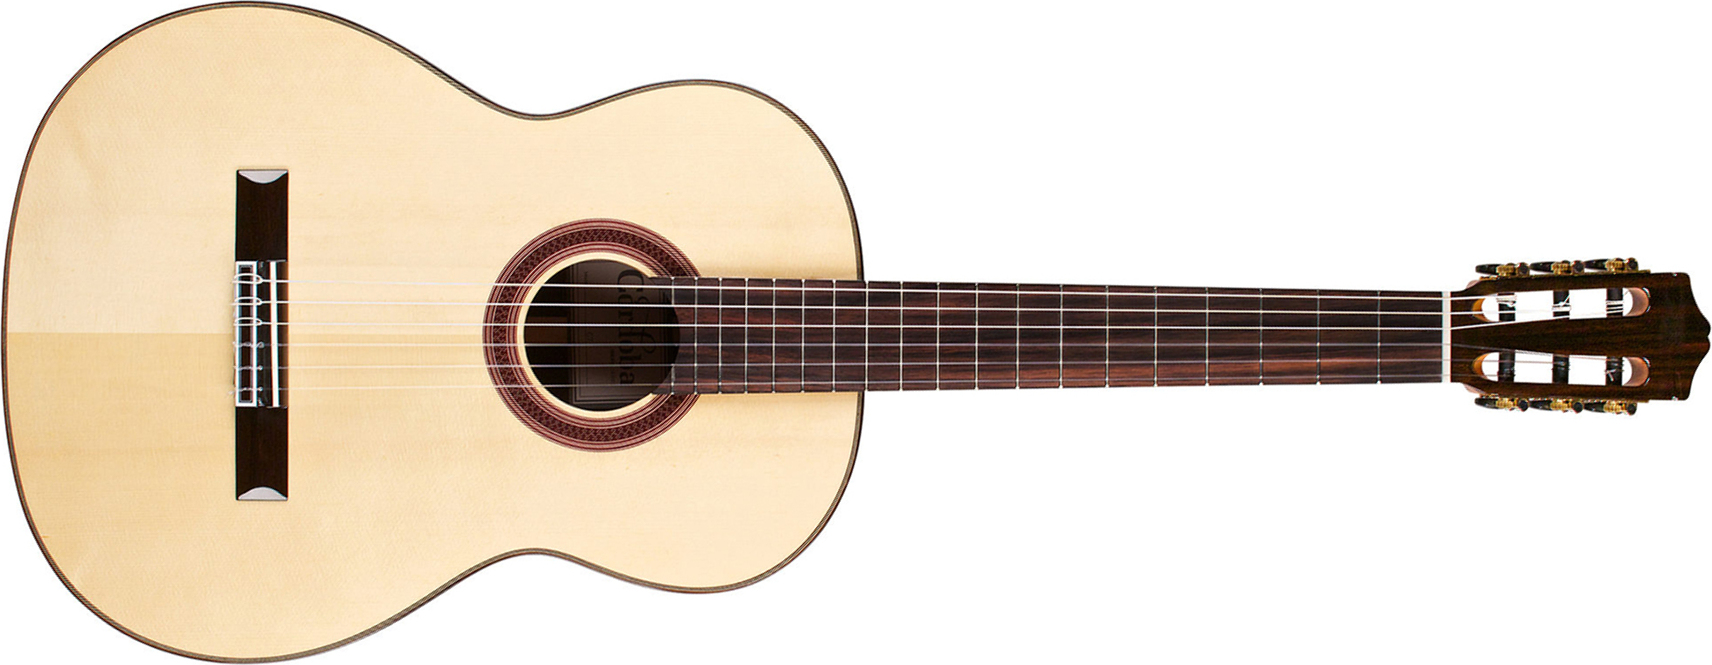 Cordoba C7 Sp Traditional 4/4 Epicea Palissandre Rw - Natural - Classical guitar 4/4 size - Main picture